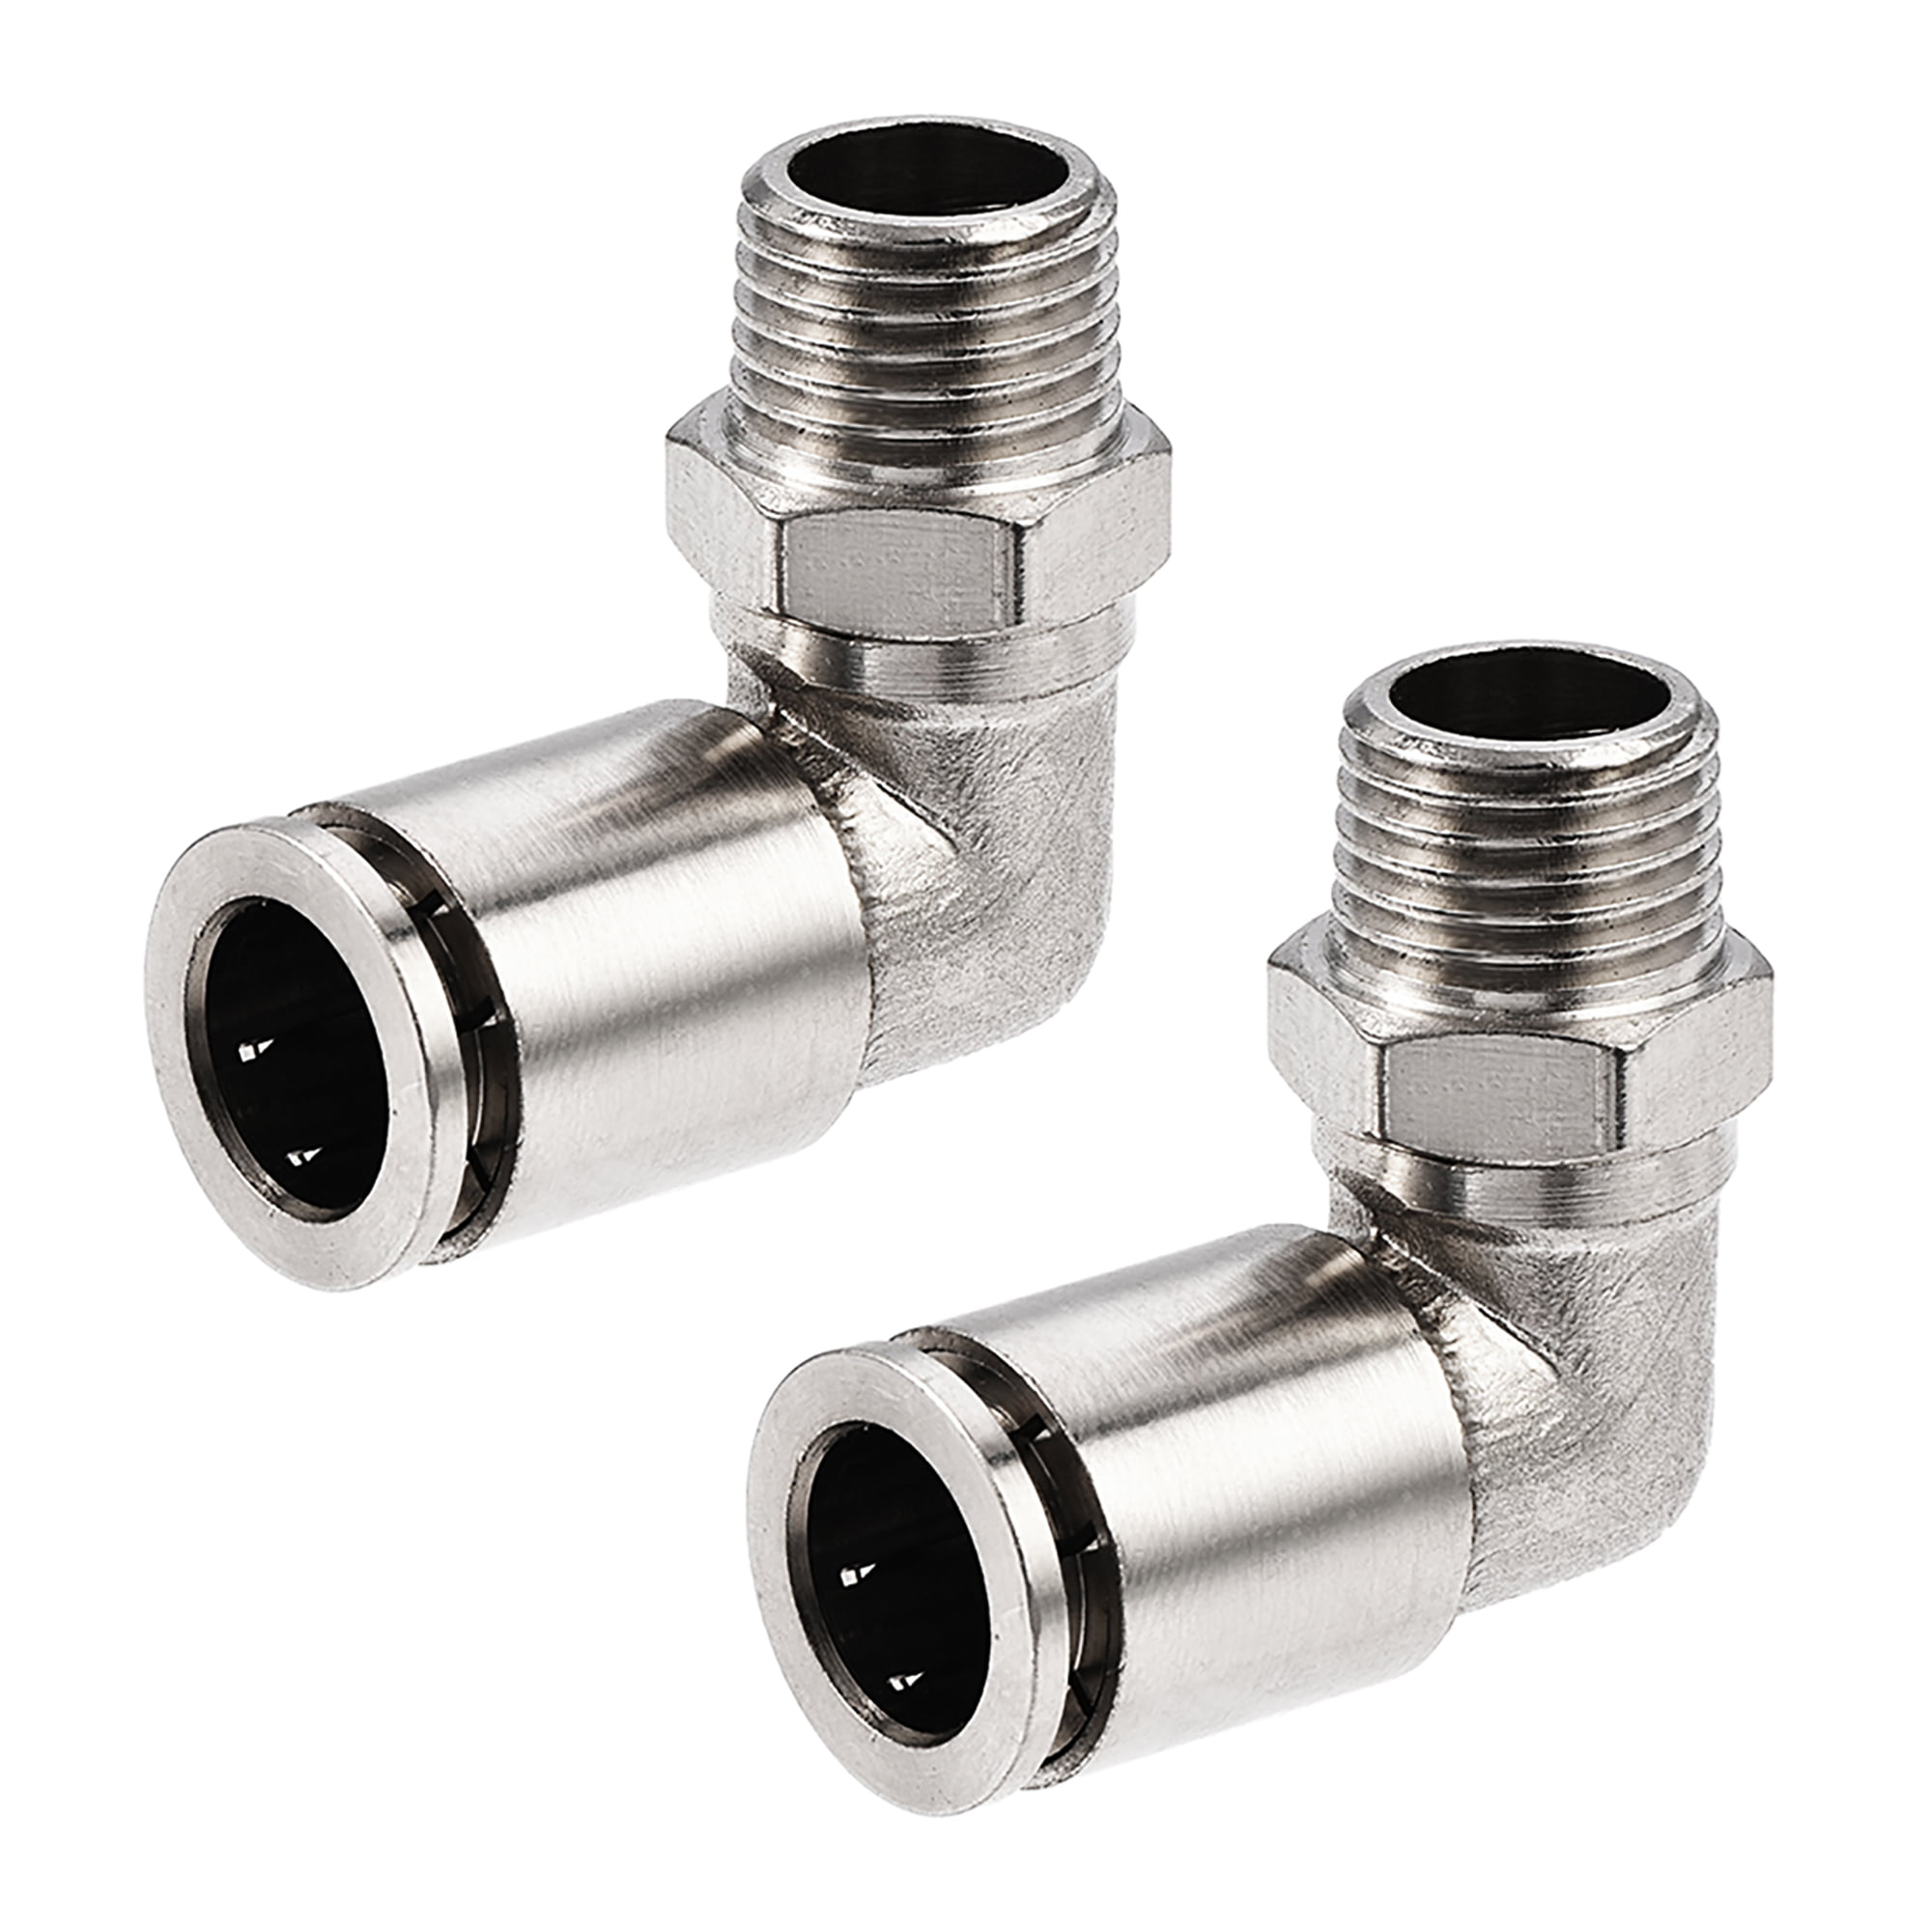 10 x NICKEL PLATED PNEUMATIC 90 ELBOW CONNECTOR 6mm PUSH IN to 1/8 BSP MALE 